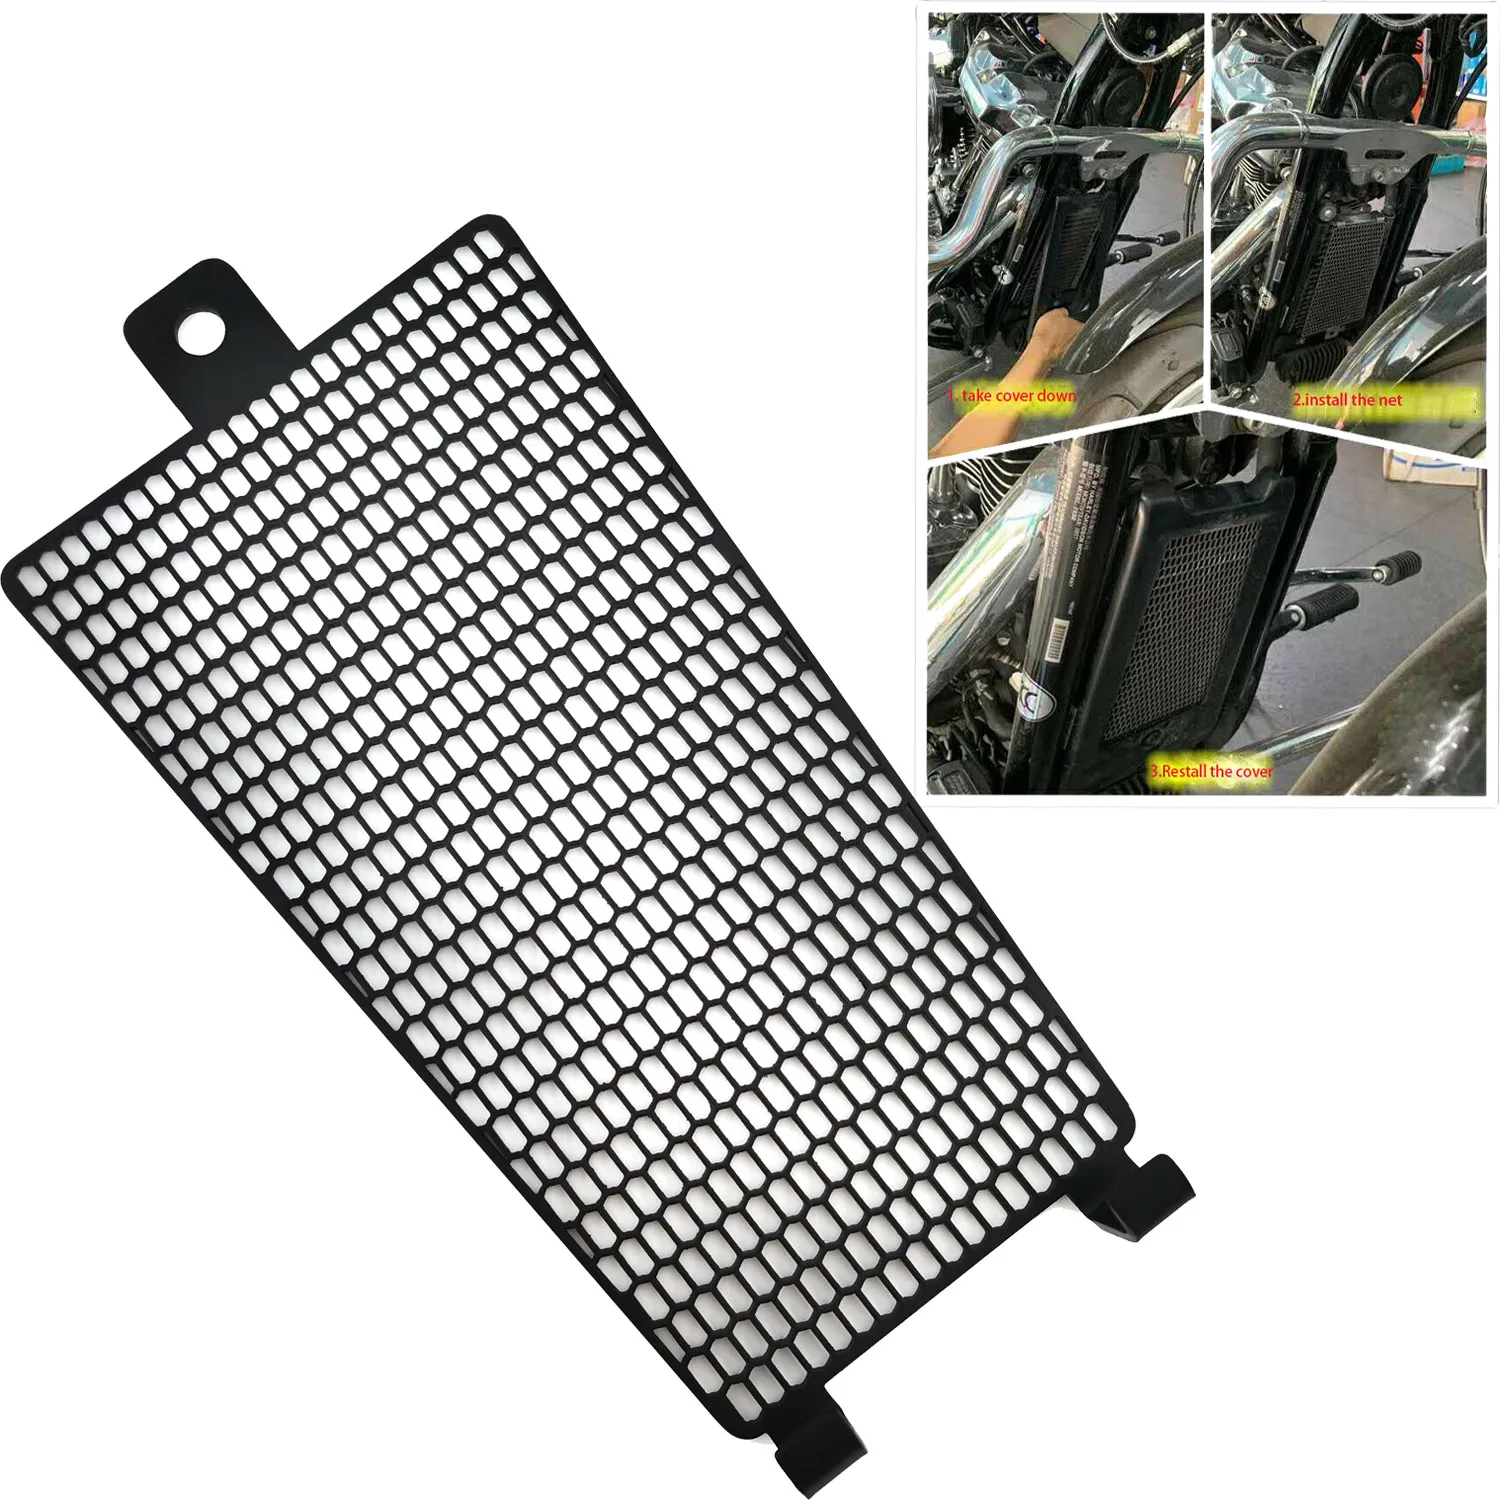 Stainless Steel Cooler Cooling Radiator Guard Grill Net Protector Cover Fit Harley Softail Fat Boy Breakout Low Rider 2018-2021